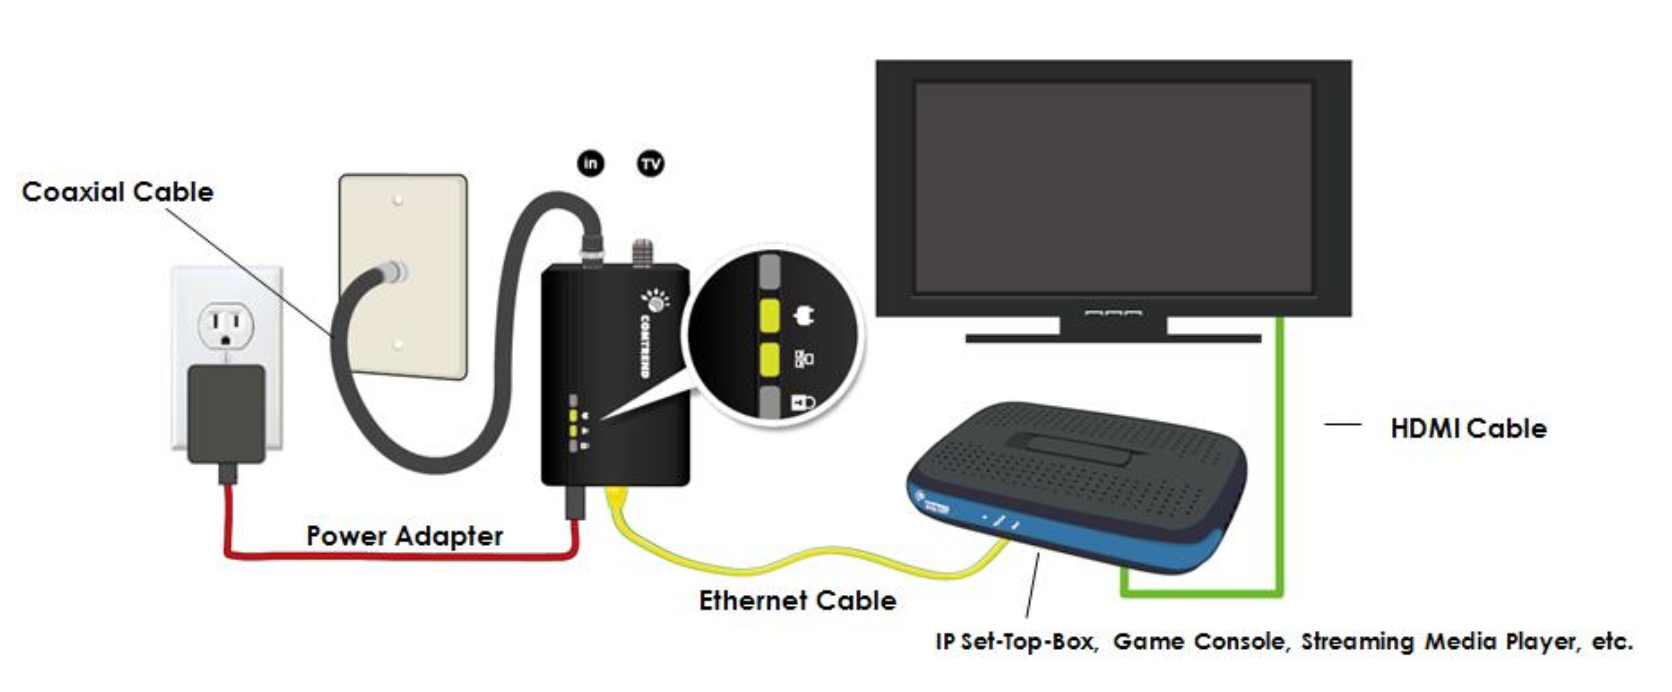 How Ethernet Gets Out of the Coax